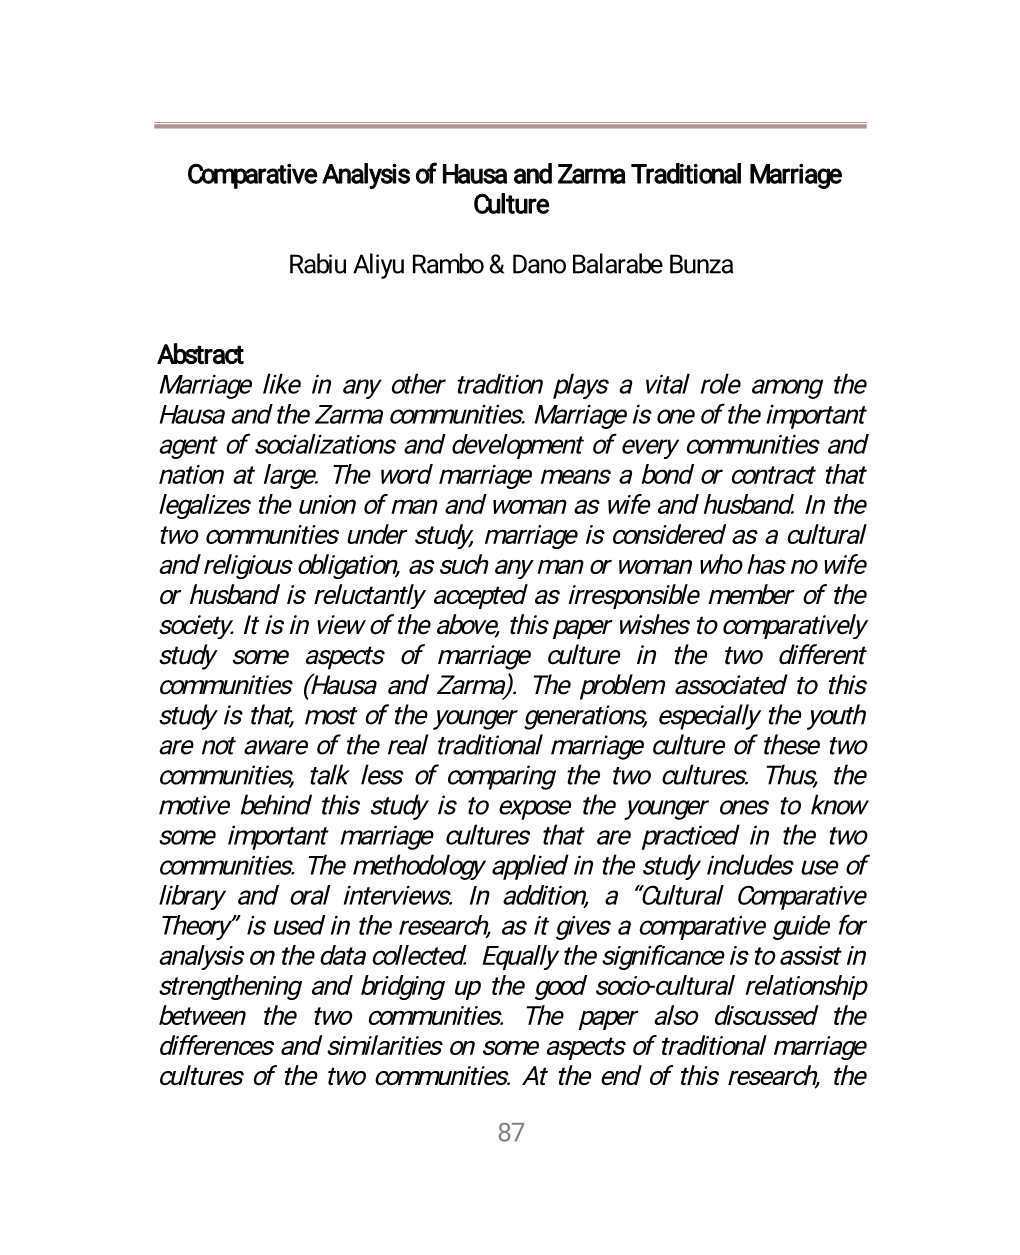 Comparative Analysis of Hausa and Zarma Traditional Marriage Culture